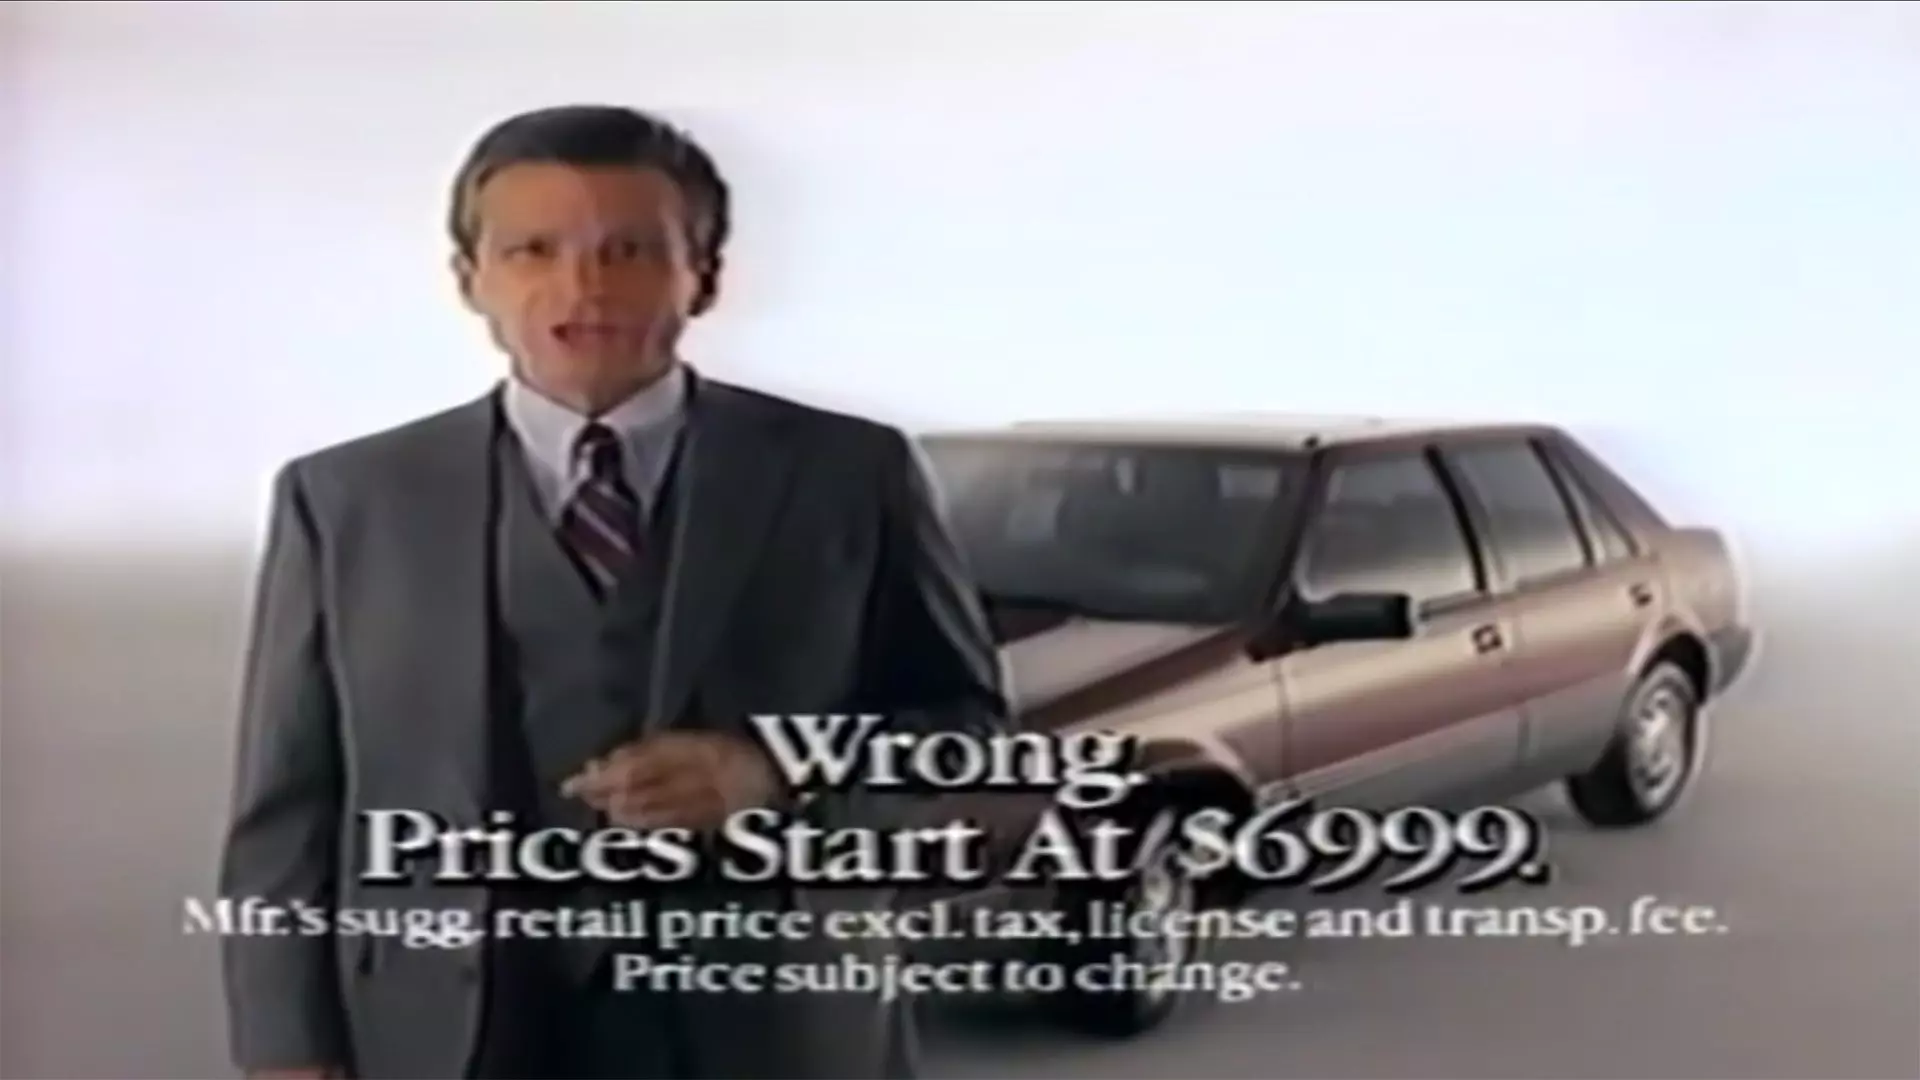 Remembering Joe Isuzu: A Truly Bizarre Character Invented To Sell Cars With Obvious Lies